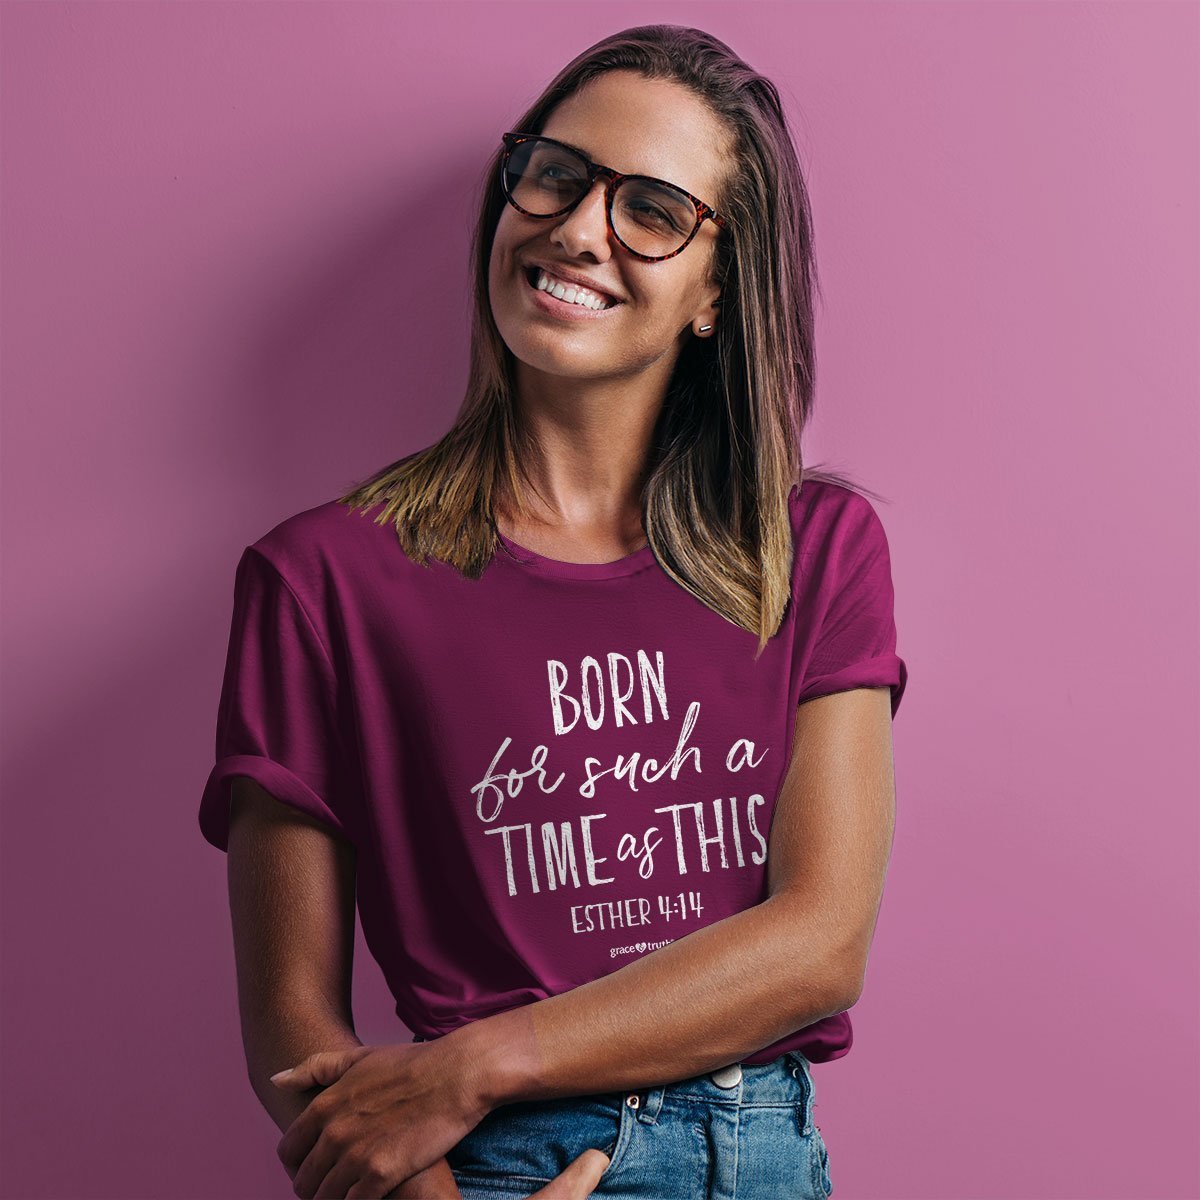 Cherished Girl Grace & Truth Born For Such a Time as This Girlie Christian Bright T Shirt